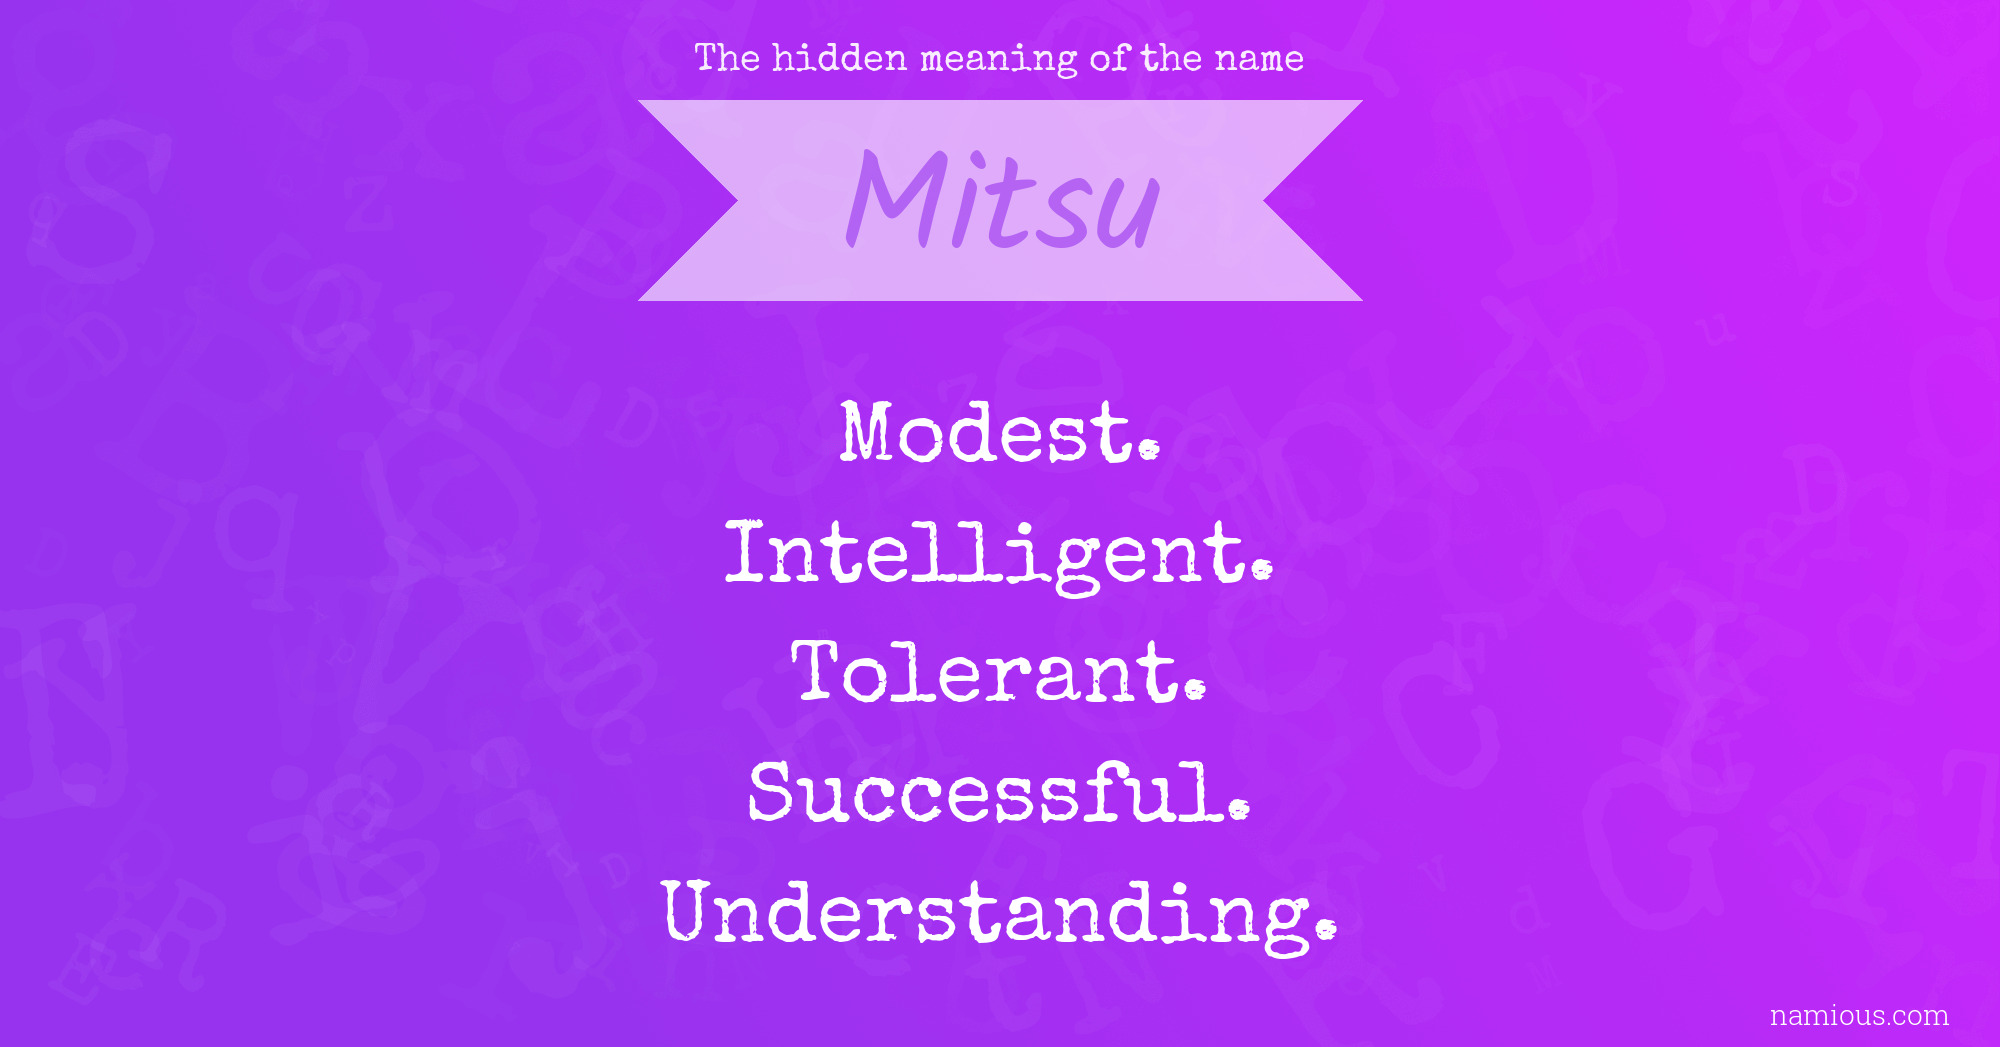 The hidden meaning of the name Mitsu